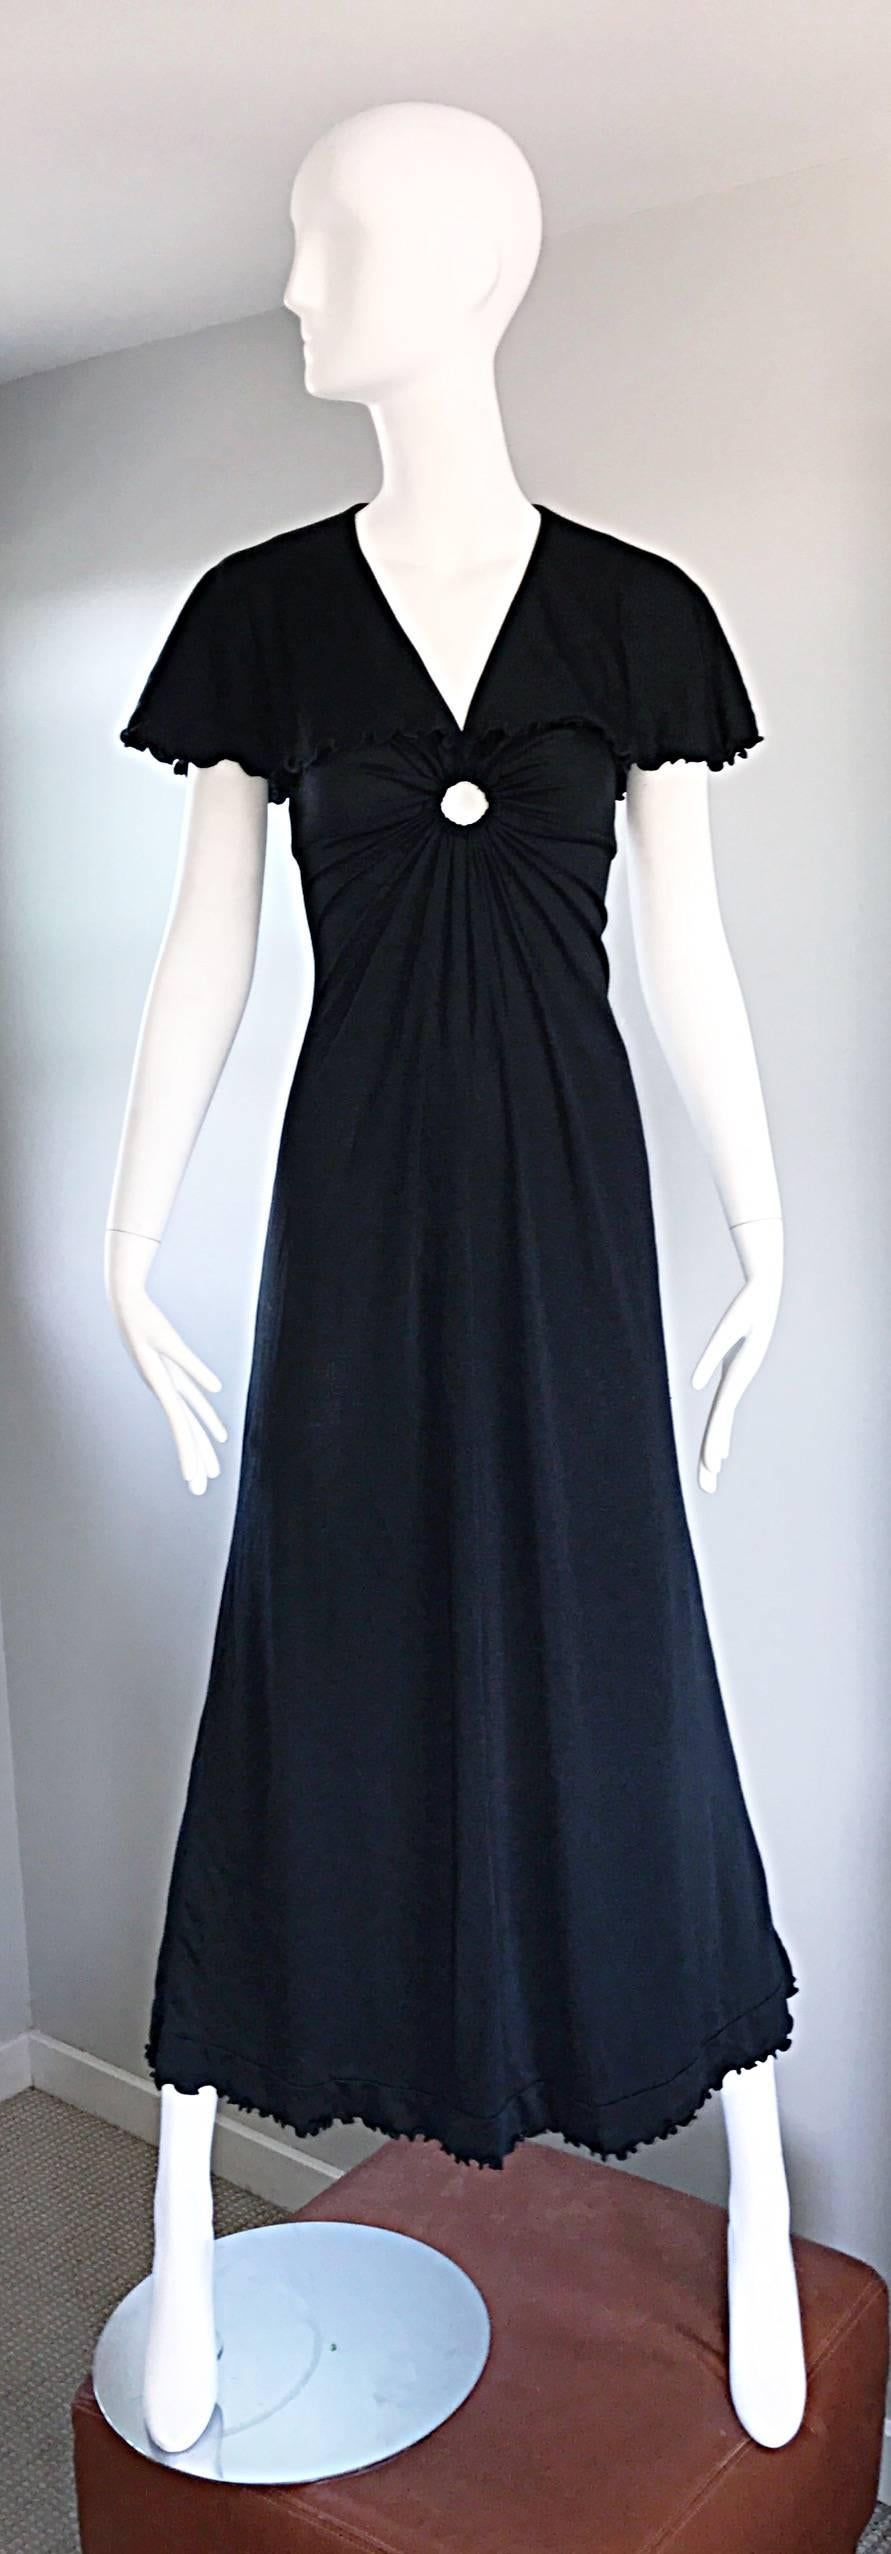 Sexy and flattering vintage 1970s GIORGIO SANT'ANGELO black jersey maxi dress / gown, with keyhole at center bust! Flattering fitted stretch bodice features gathers leading to the center keyhole. Chic attached caplet at shoulder. Forgiving full